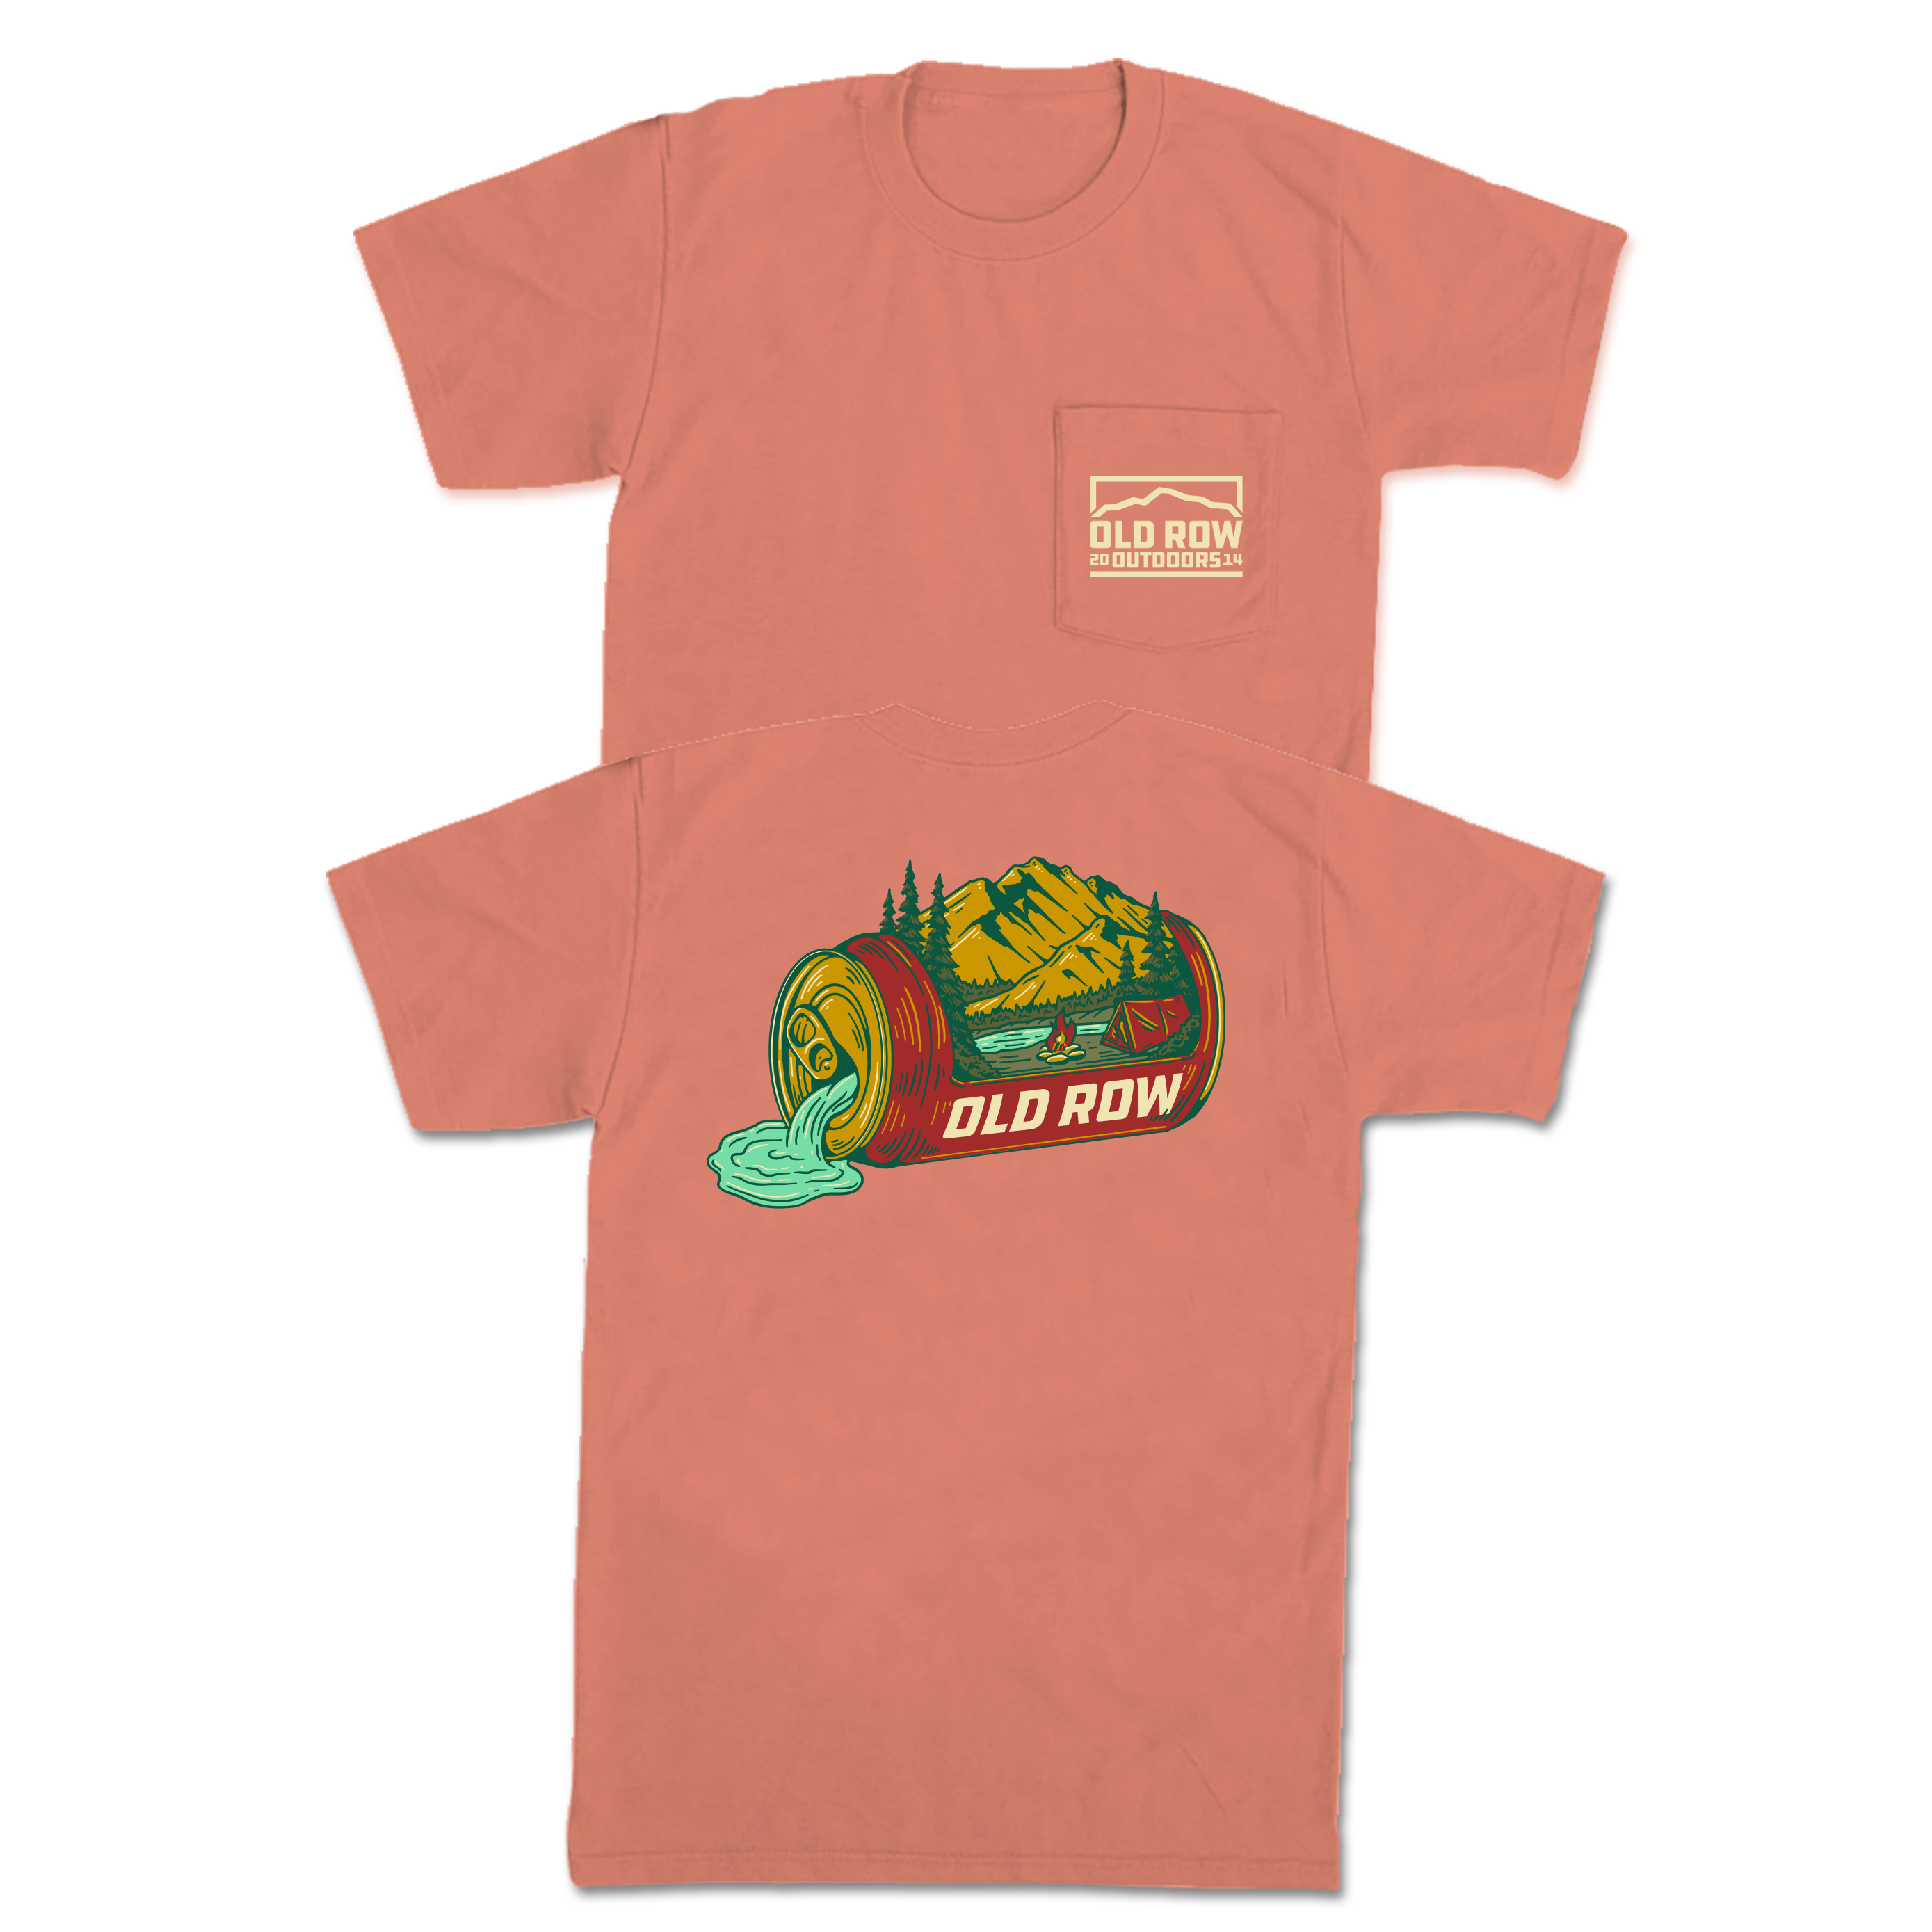 The Beer Can Mountain Pocket Tee